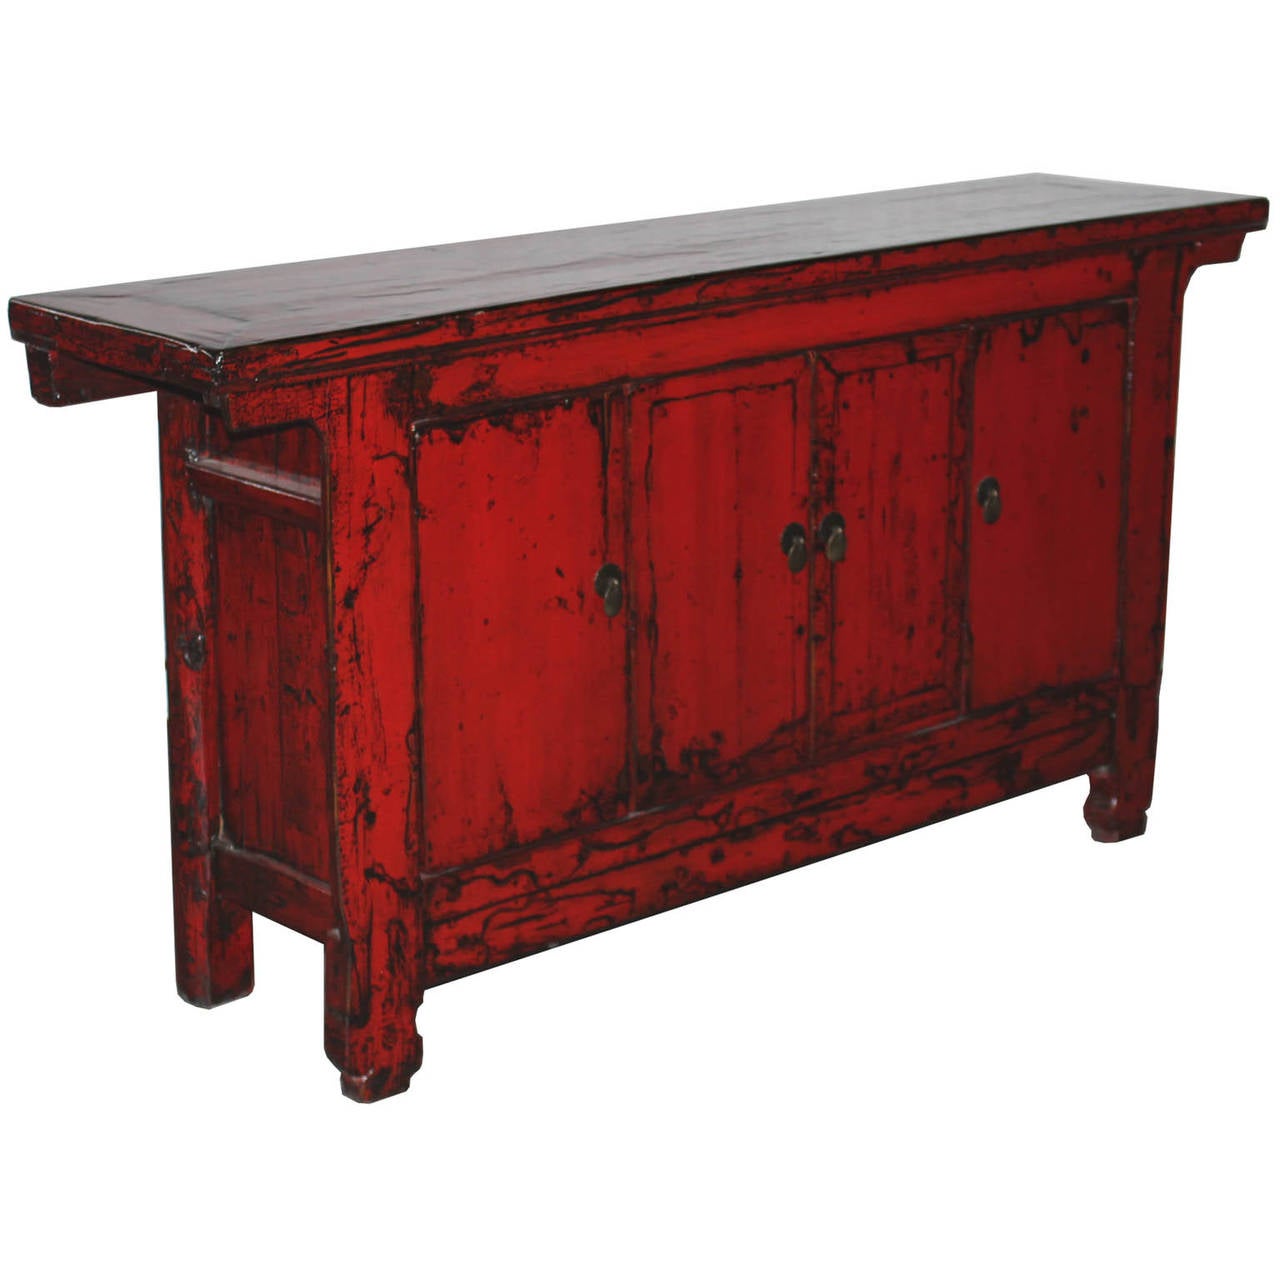 Four-door red lacquer sideboard with simple side spandrels and carved feet. New interior shelf and hardware. Place under a flat screen tv as a media cabinet or use as a server in the dining room. Gansu, China circa 1880s.